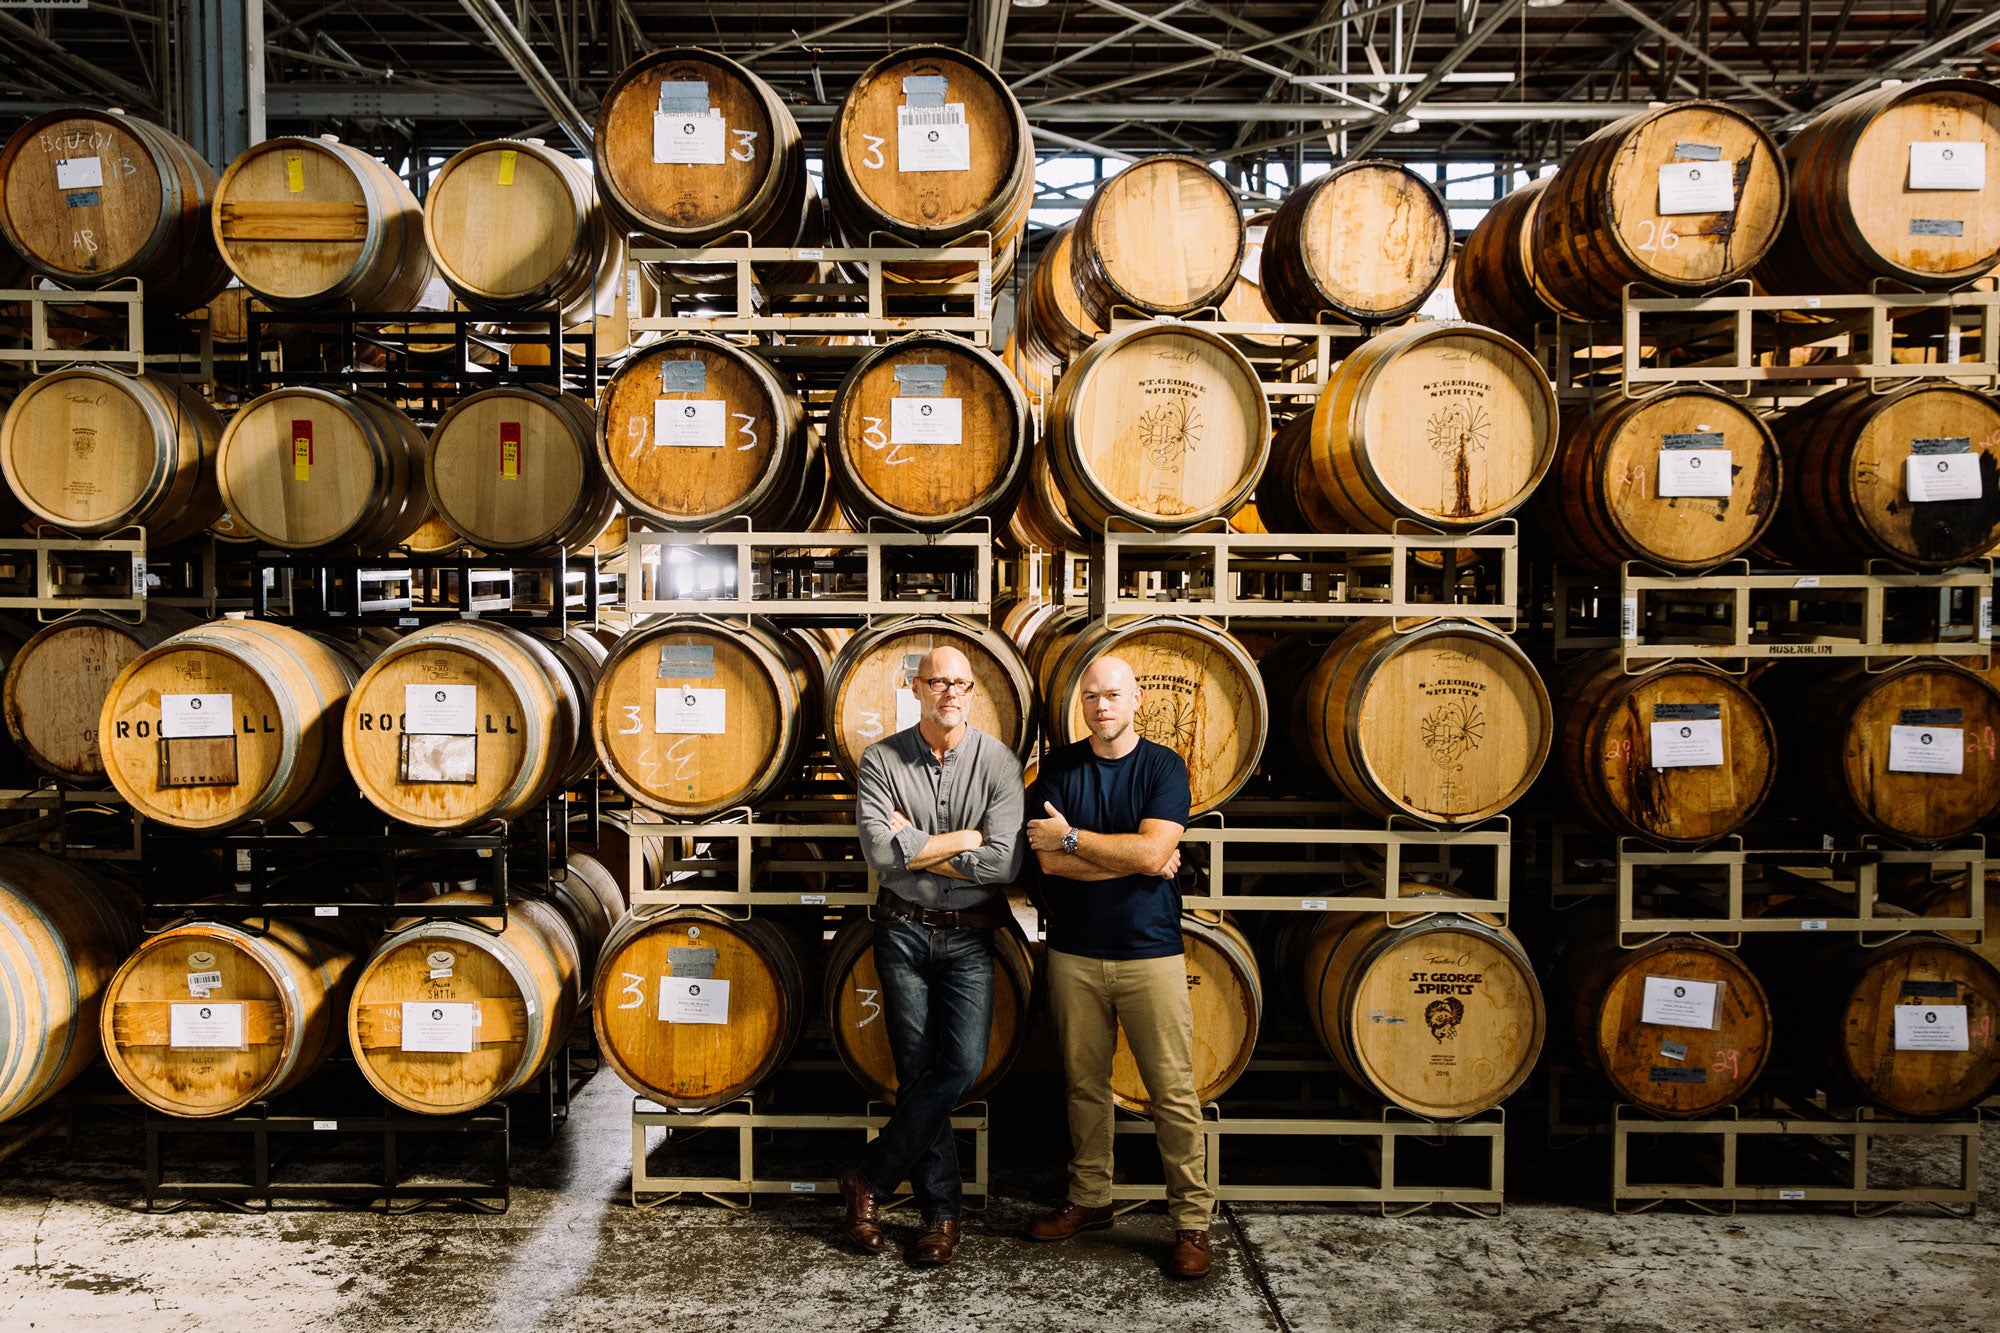 Lance Winter and David Smith standing in front of a rack of barrels